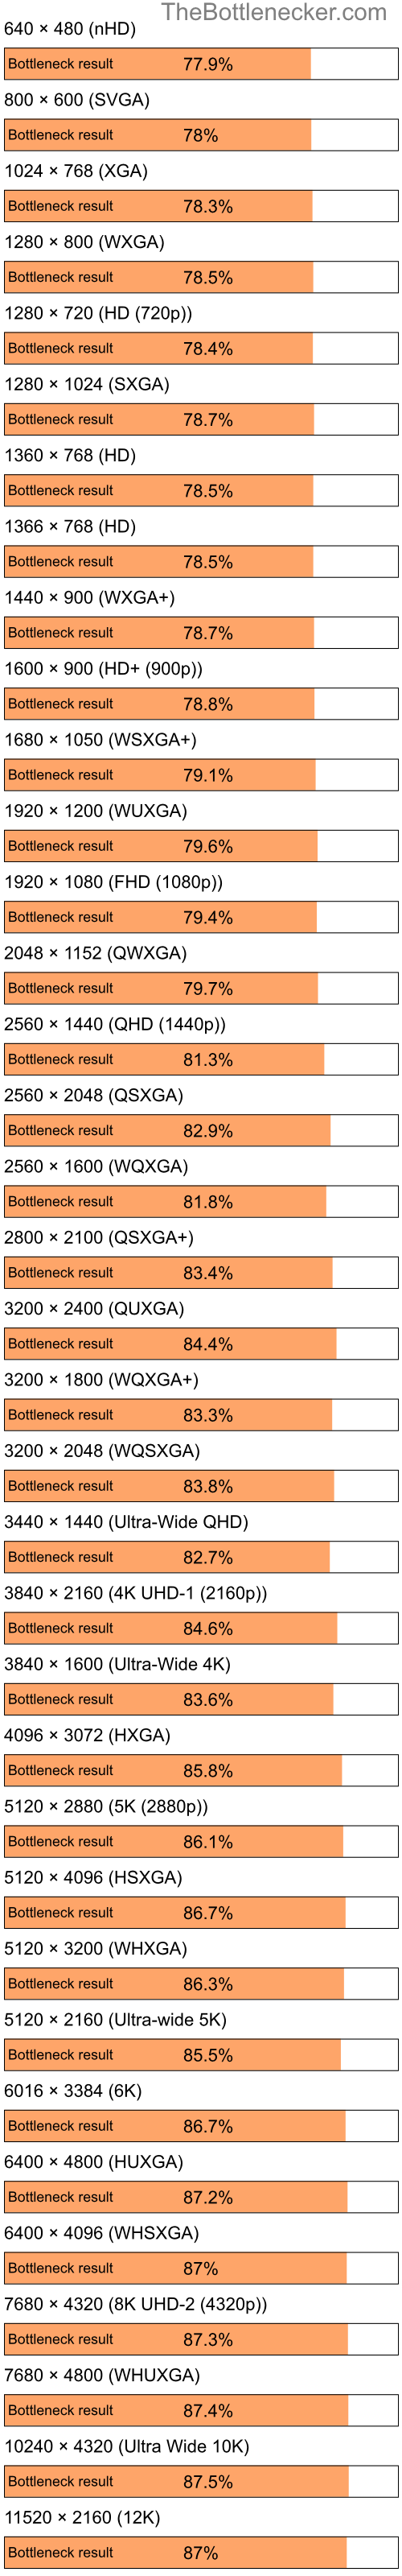 Bottleneck results by resolution for Intel Celeron M 420 and NVIDIA GeForce Go 7300 in Graphic Card Intense Tasks